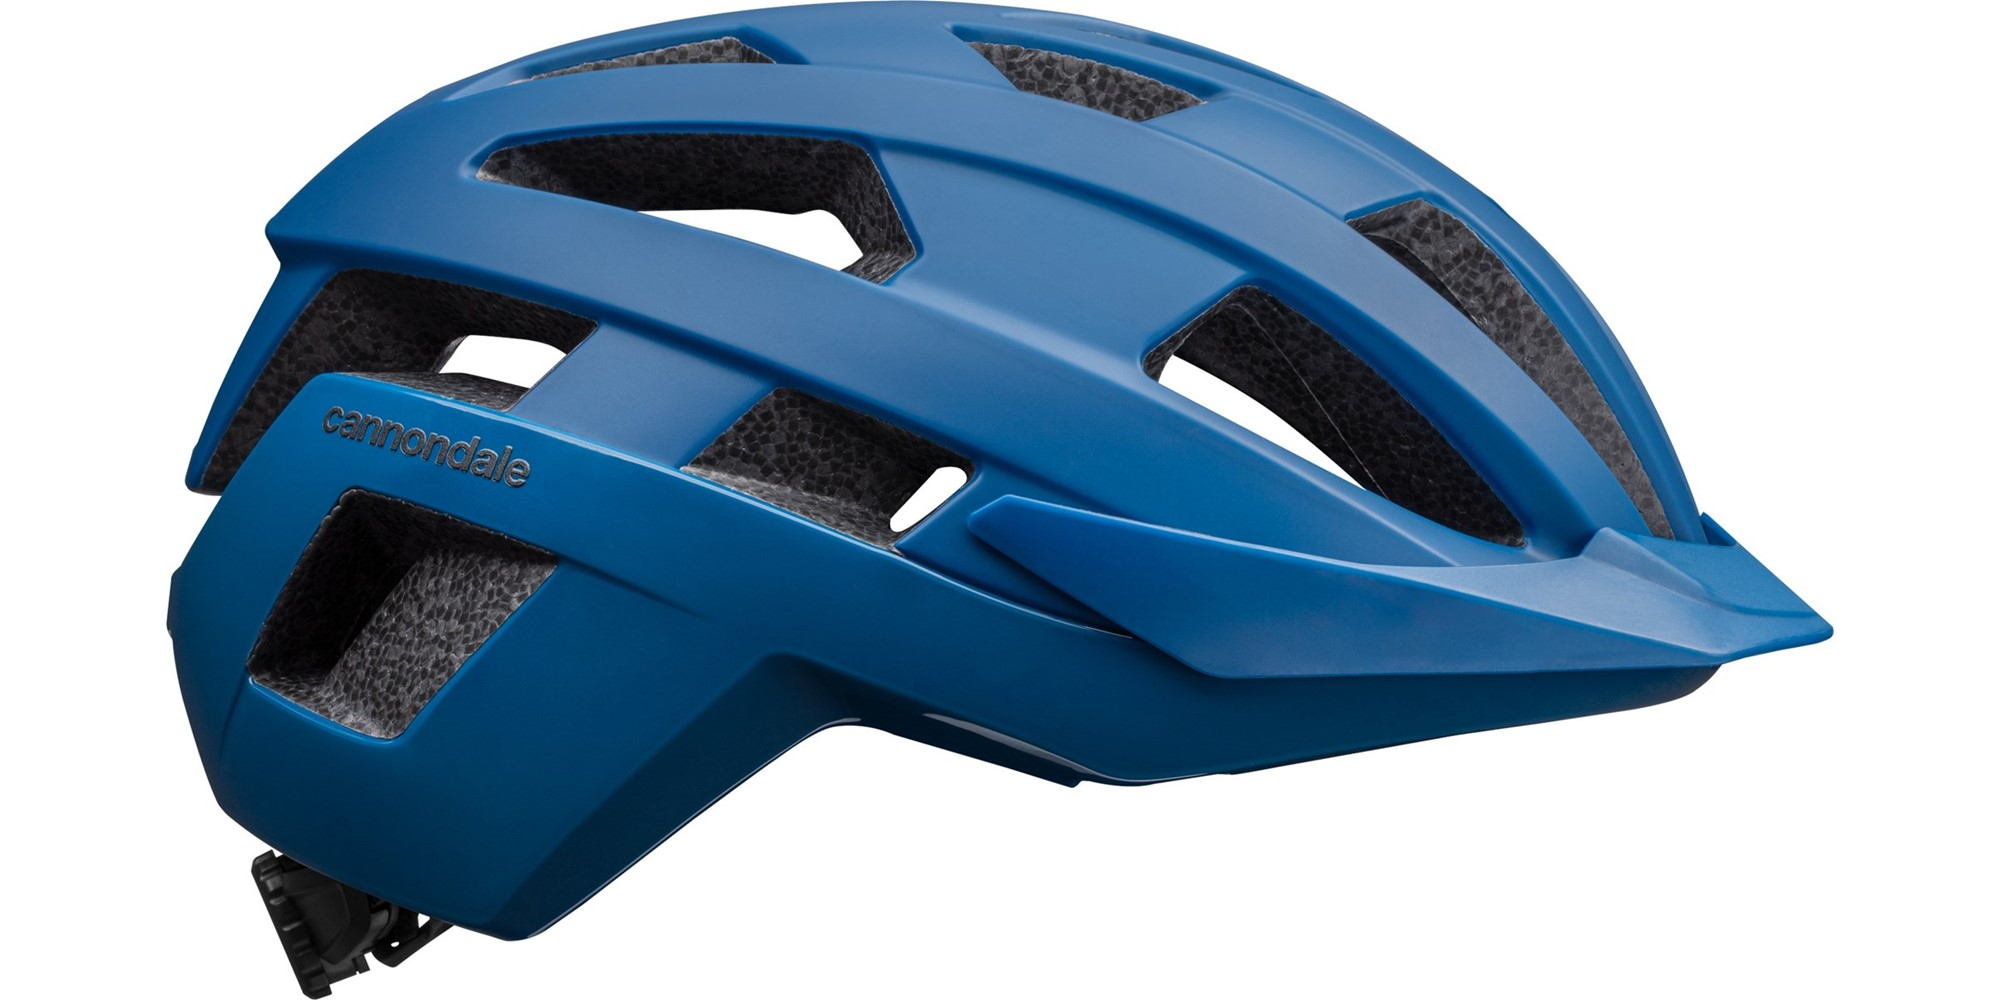 Cycles UK Cannondale  Junction MIPS Adult Cycle Helmet in Abyss Blue S/M Abyss Blue